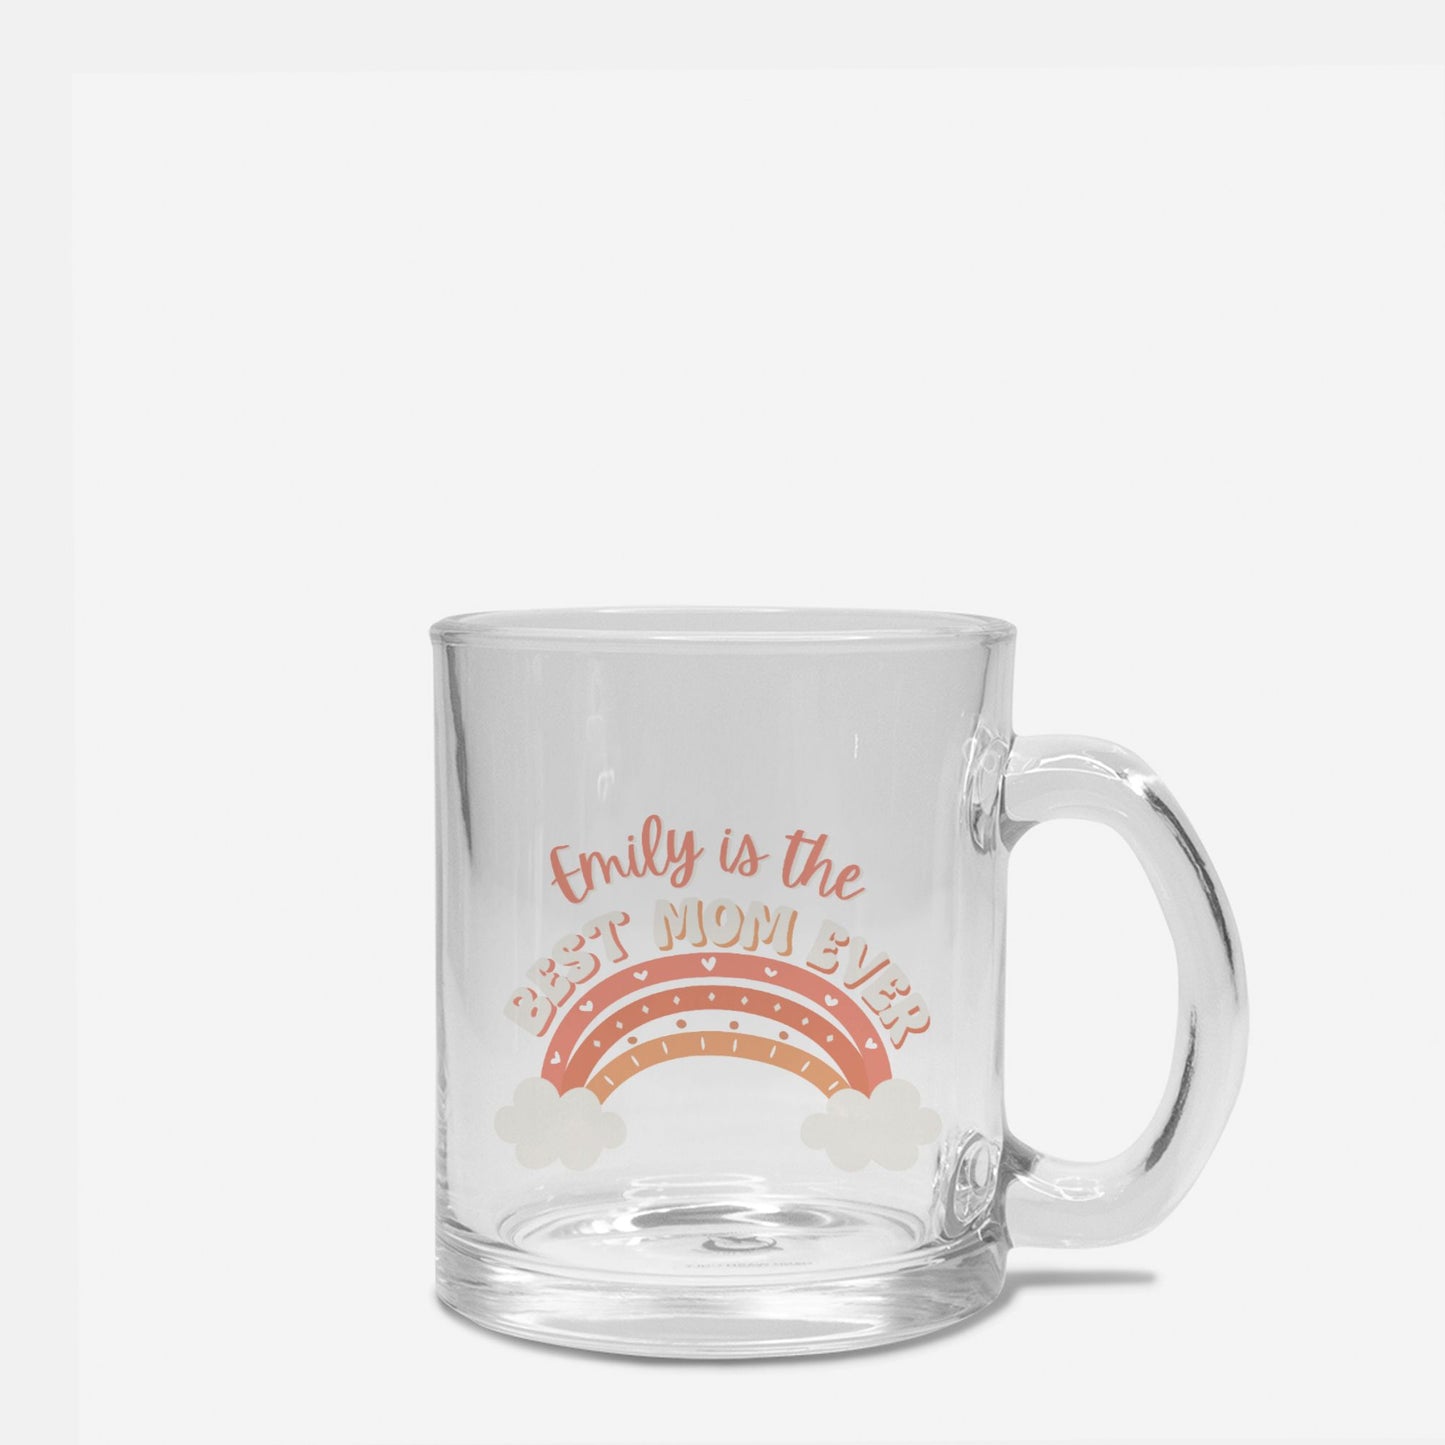 Is The Best Mom Ever Personalized Mug Glass